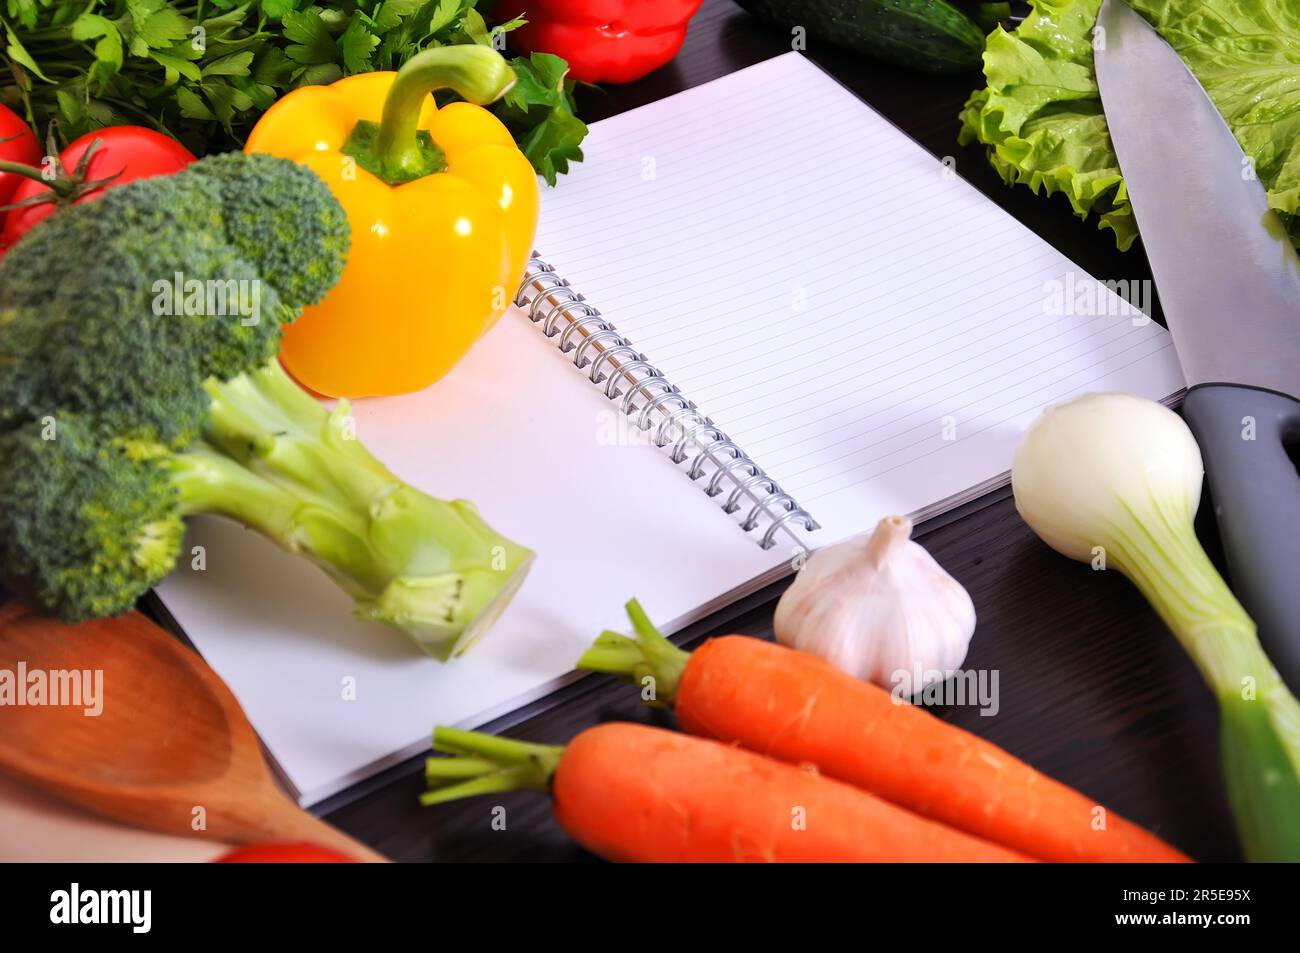 recipe book with vegetables on wooden table Stock Photo